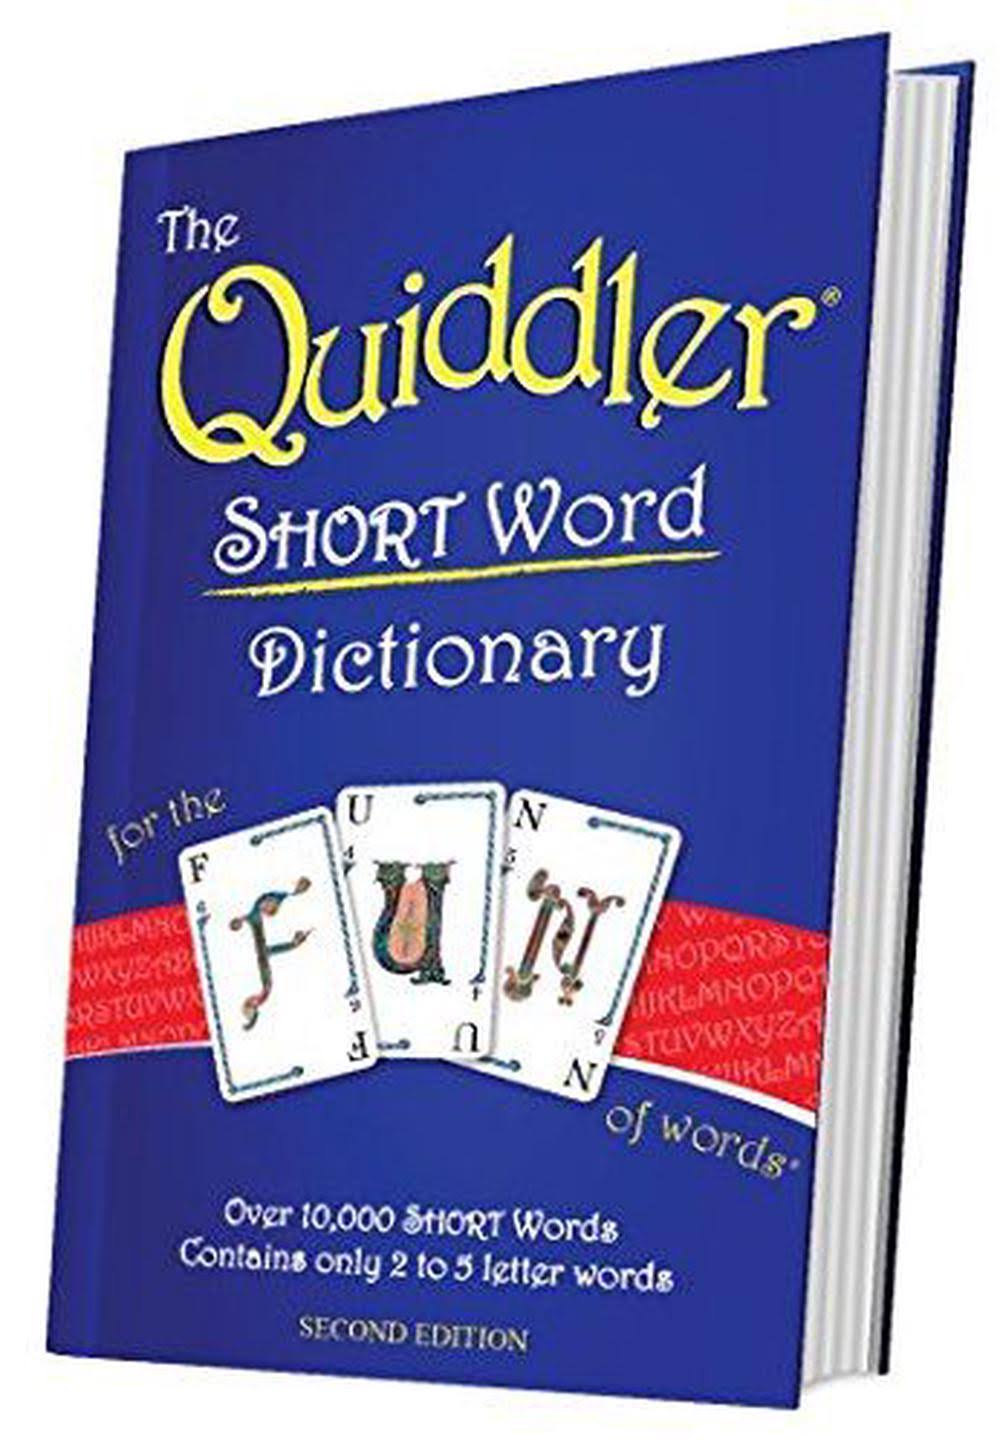 The Quiddler SHORT Word Dictionary : 2nd Edition - 370p